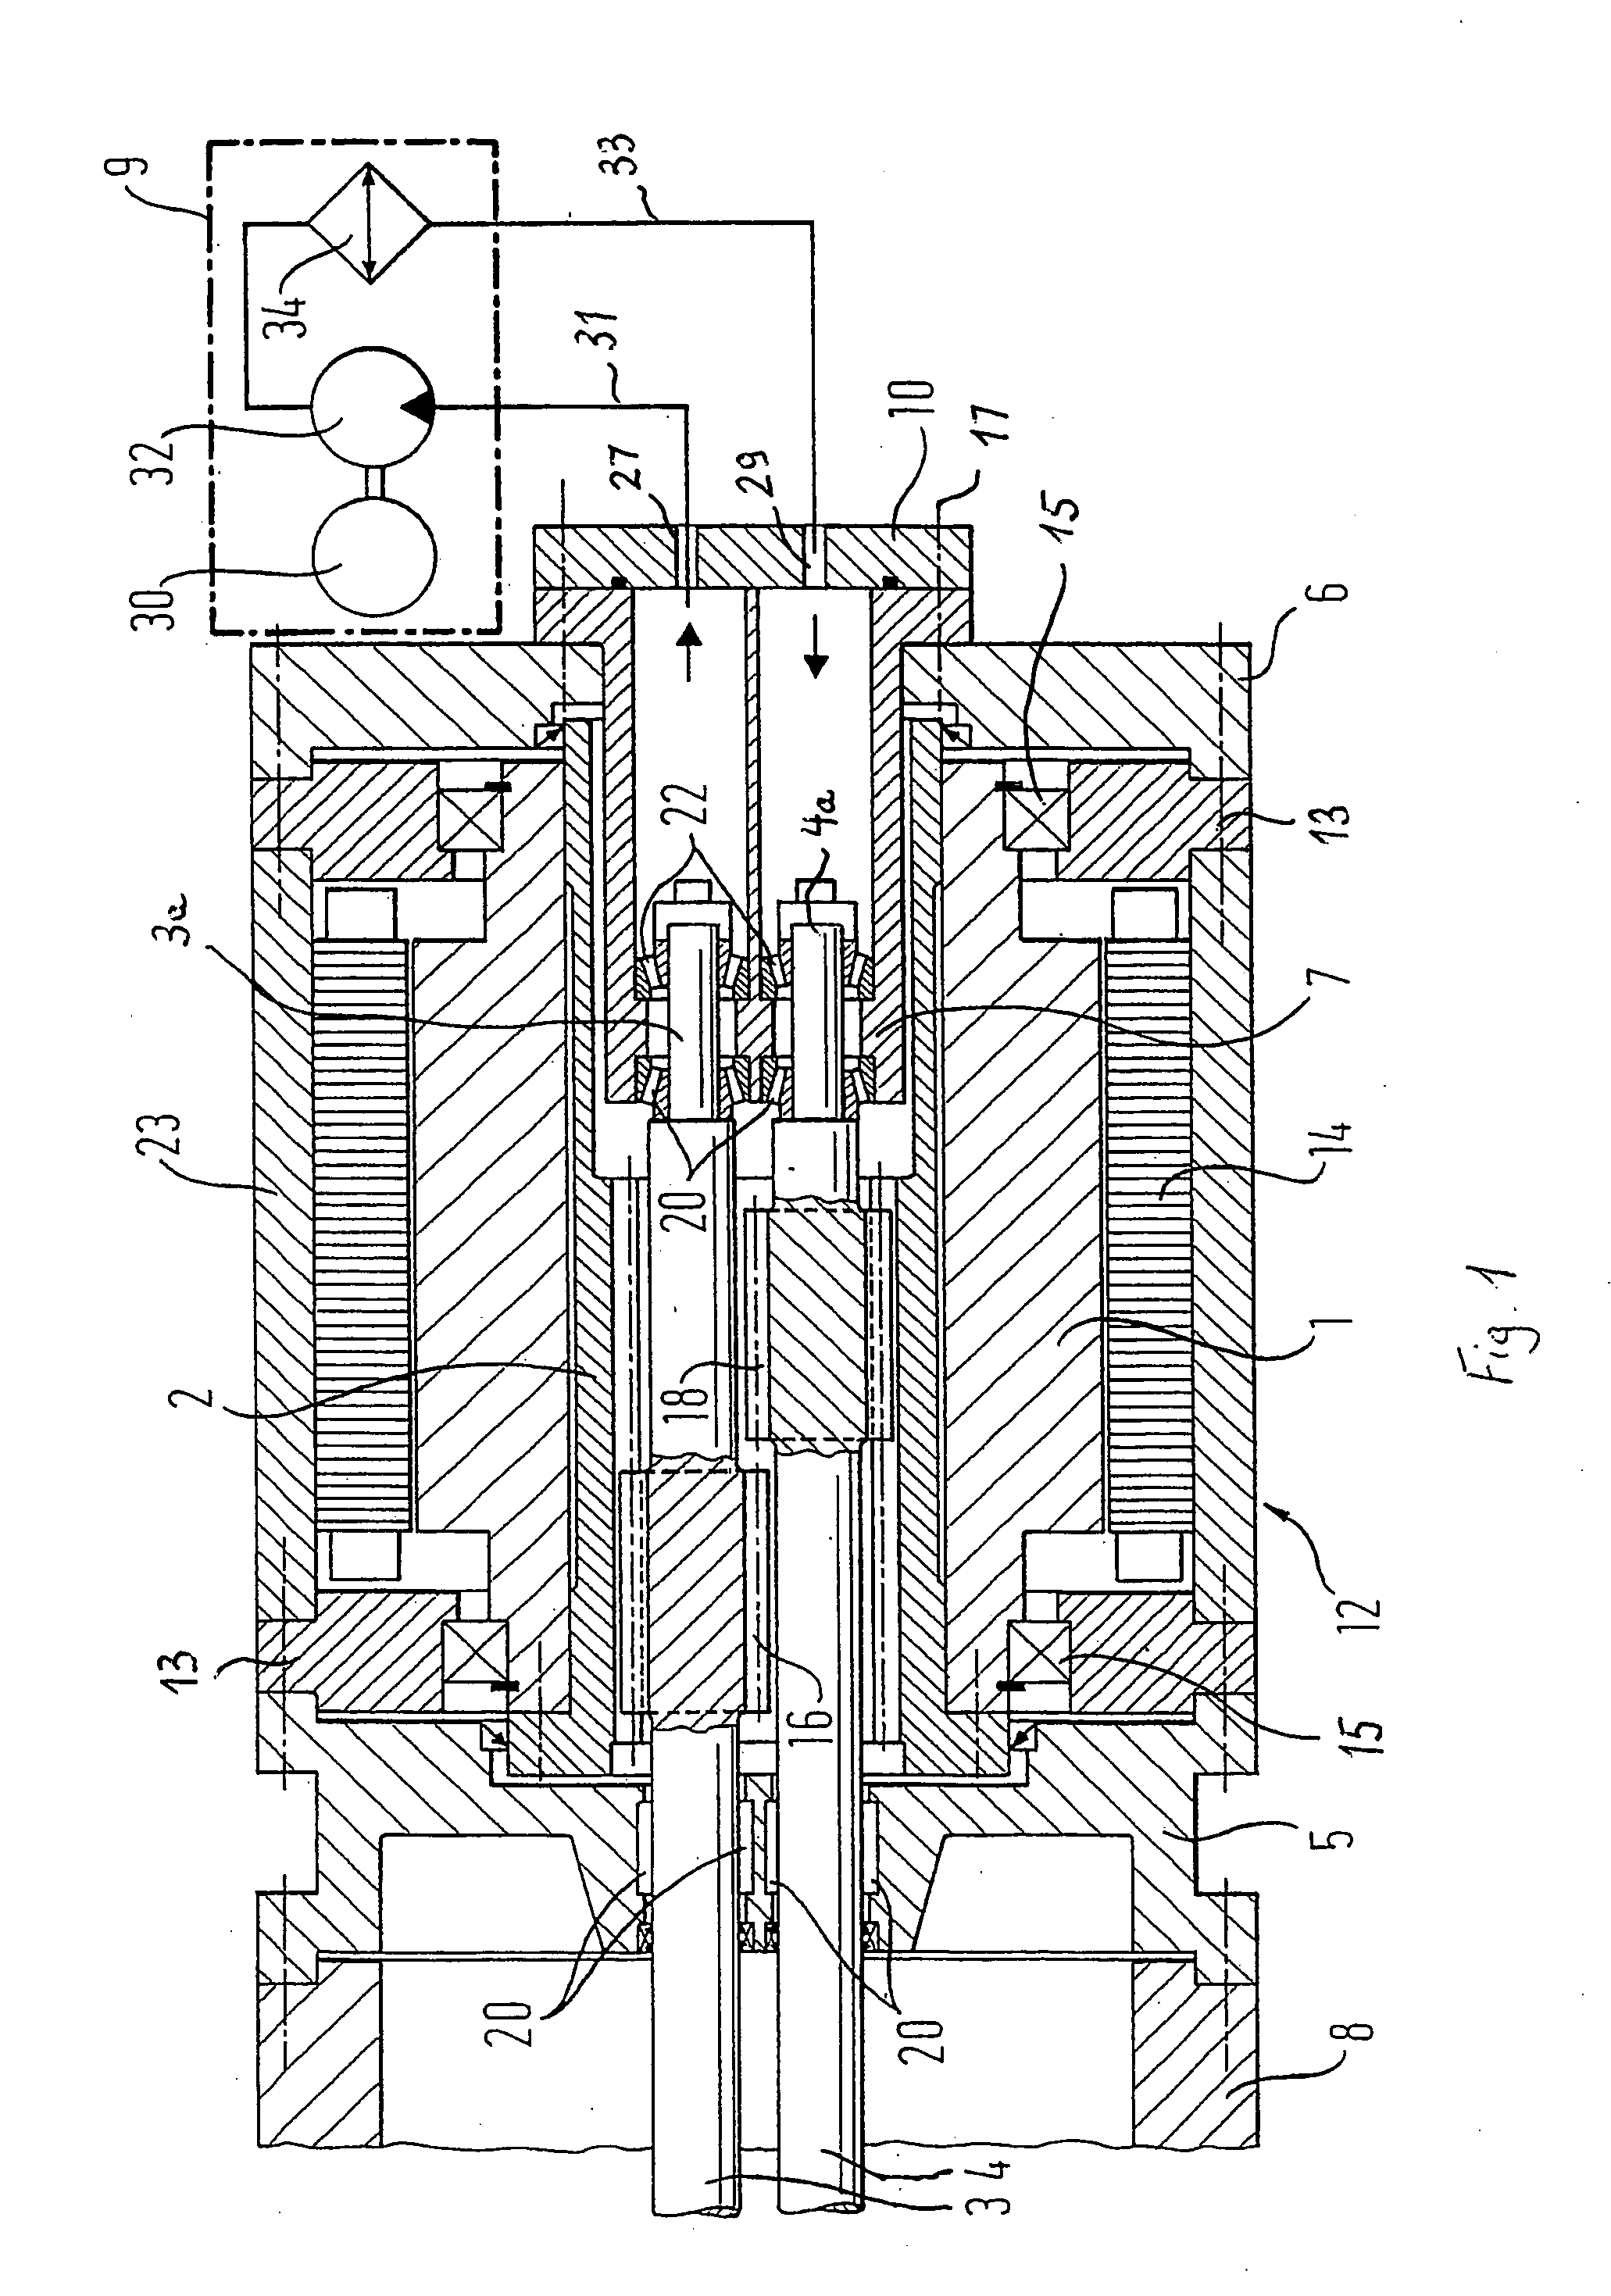 Drive apparatus for a multi-shaft extruder rotating in a same direction